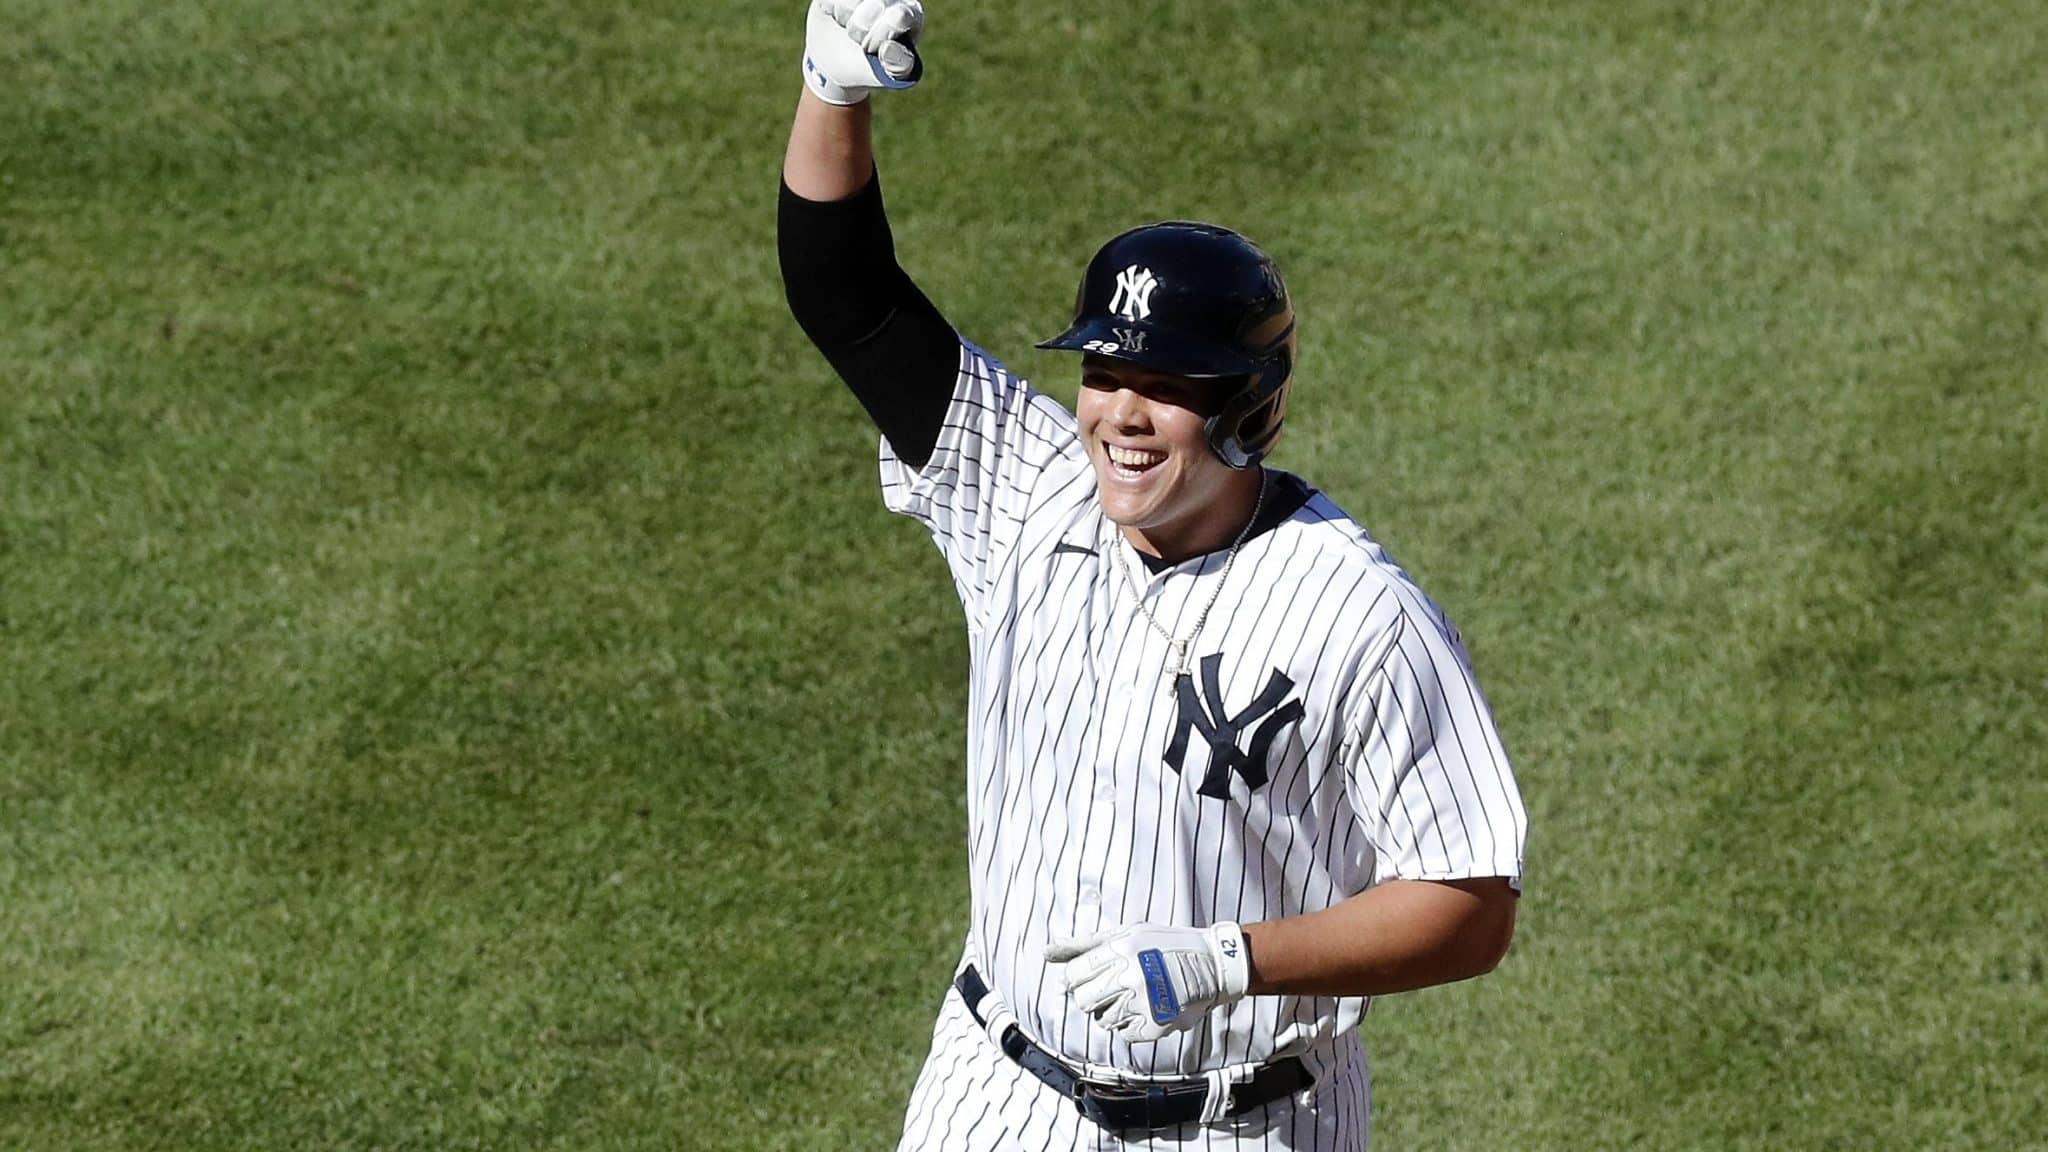 NEW YORK, NEW YORK - AUGUST 30: Gio Urshela #29 of the New York Yankees celebrates his eighth inning game winning base hit against the New York Mets during the first game of a doubleheader at Yankee Stadium on August 30, 2020 in New York City.